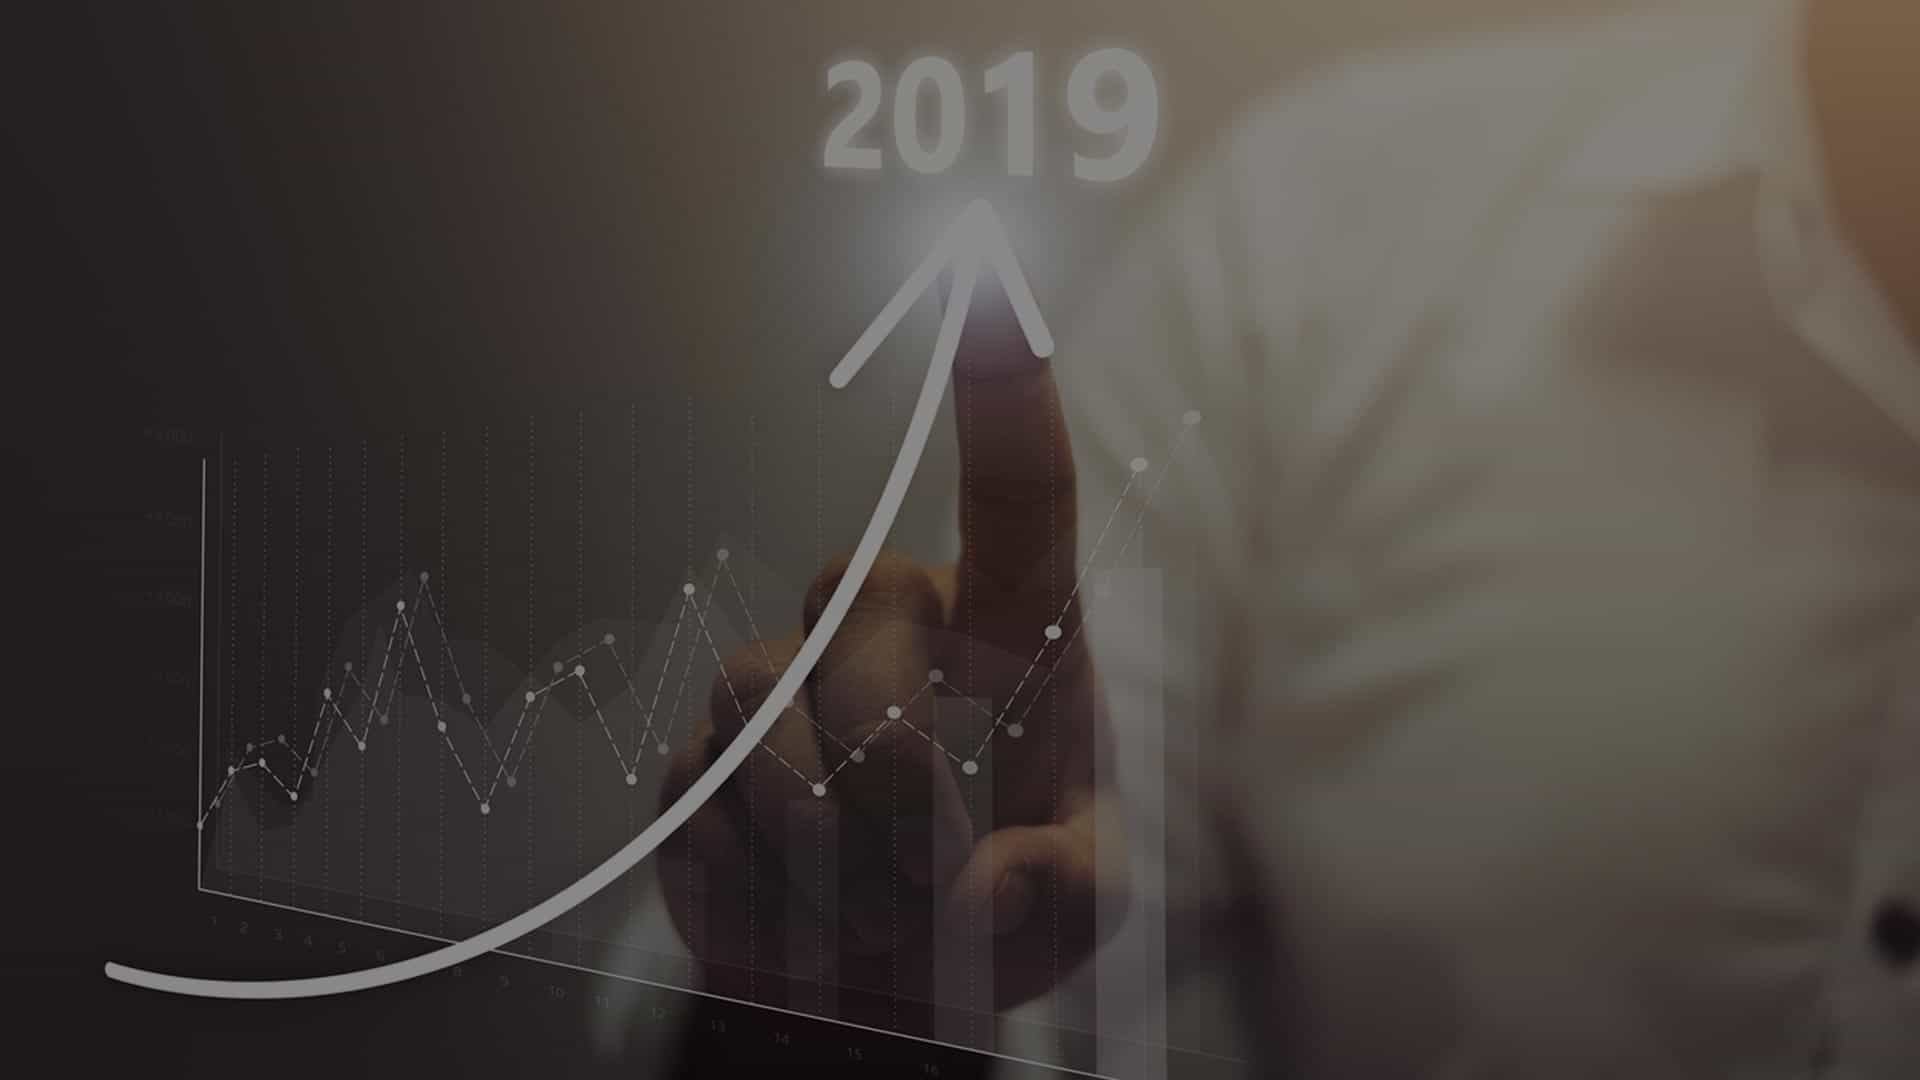 Top Digital Marketing Trends to Watch Out For in 2019